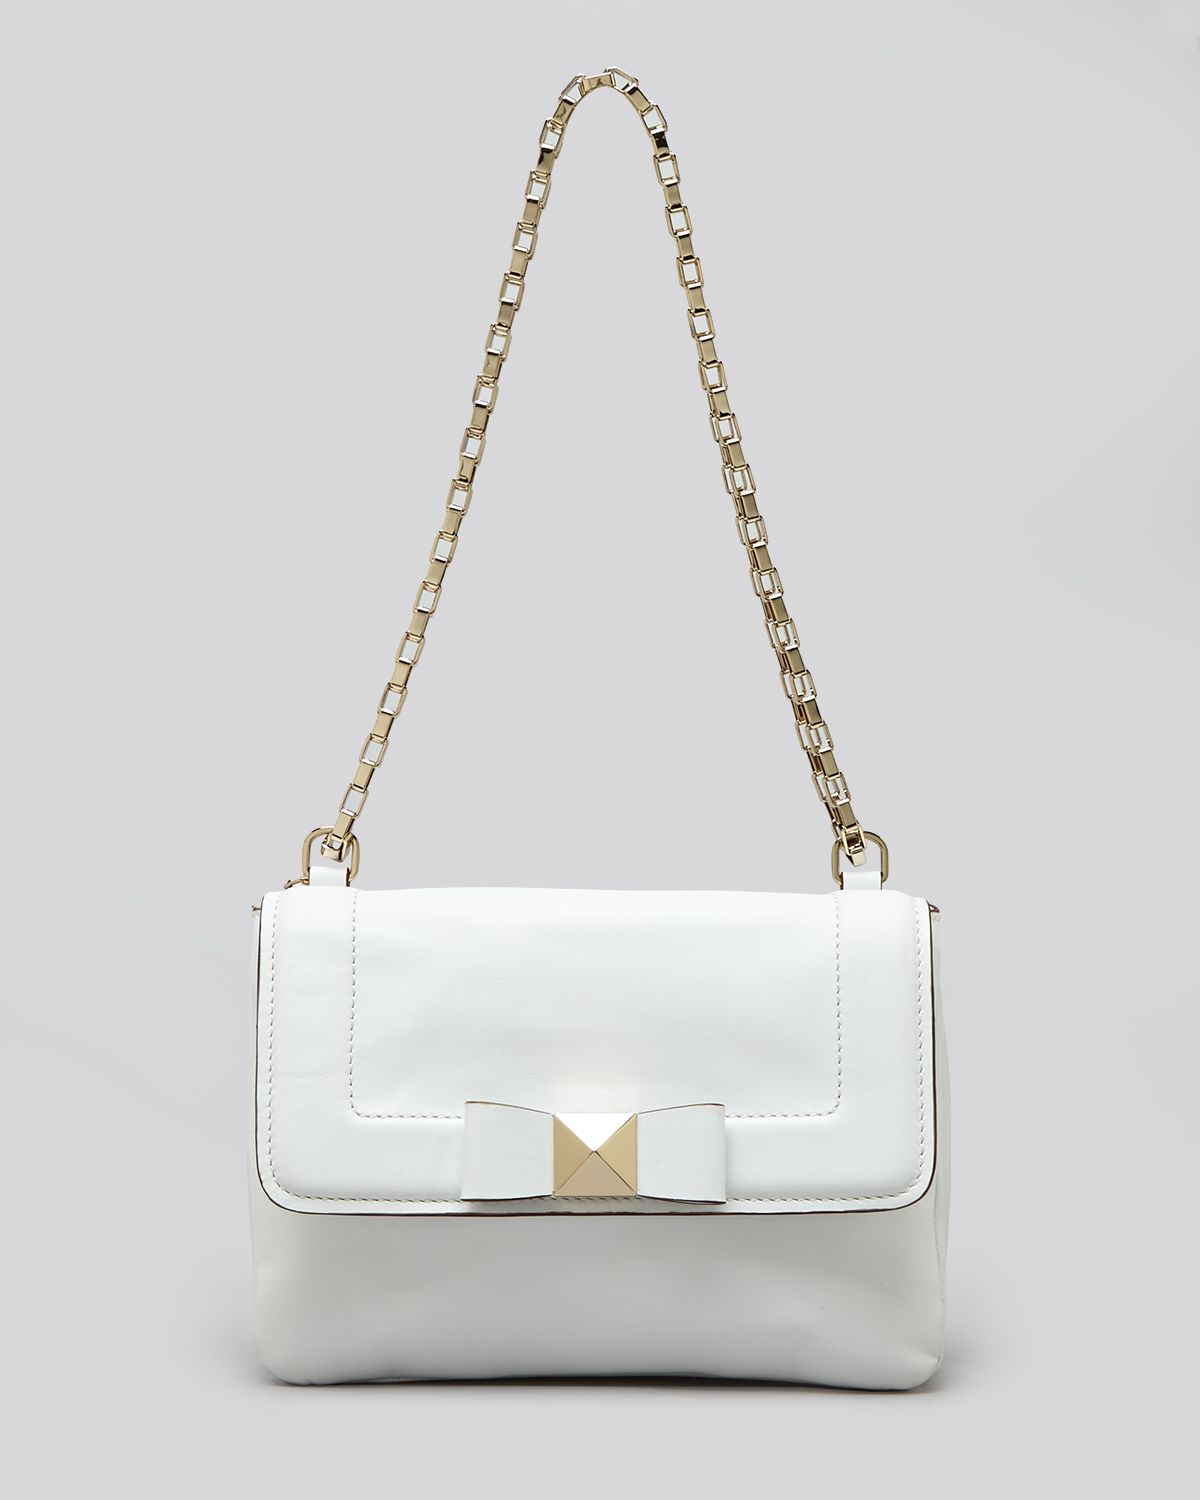 Lyst - Kate Spade New York Shoulder Bag Bow Terrace Justine in White